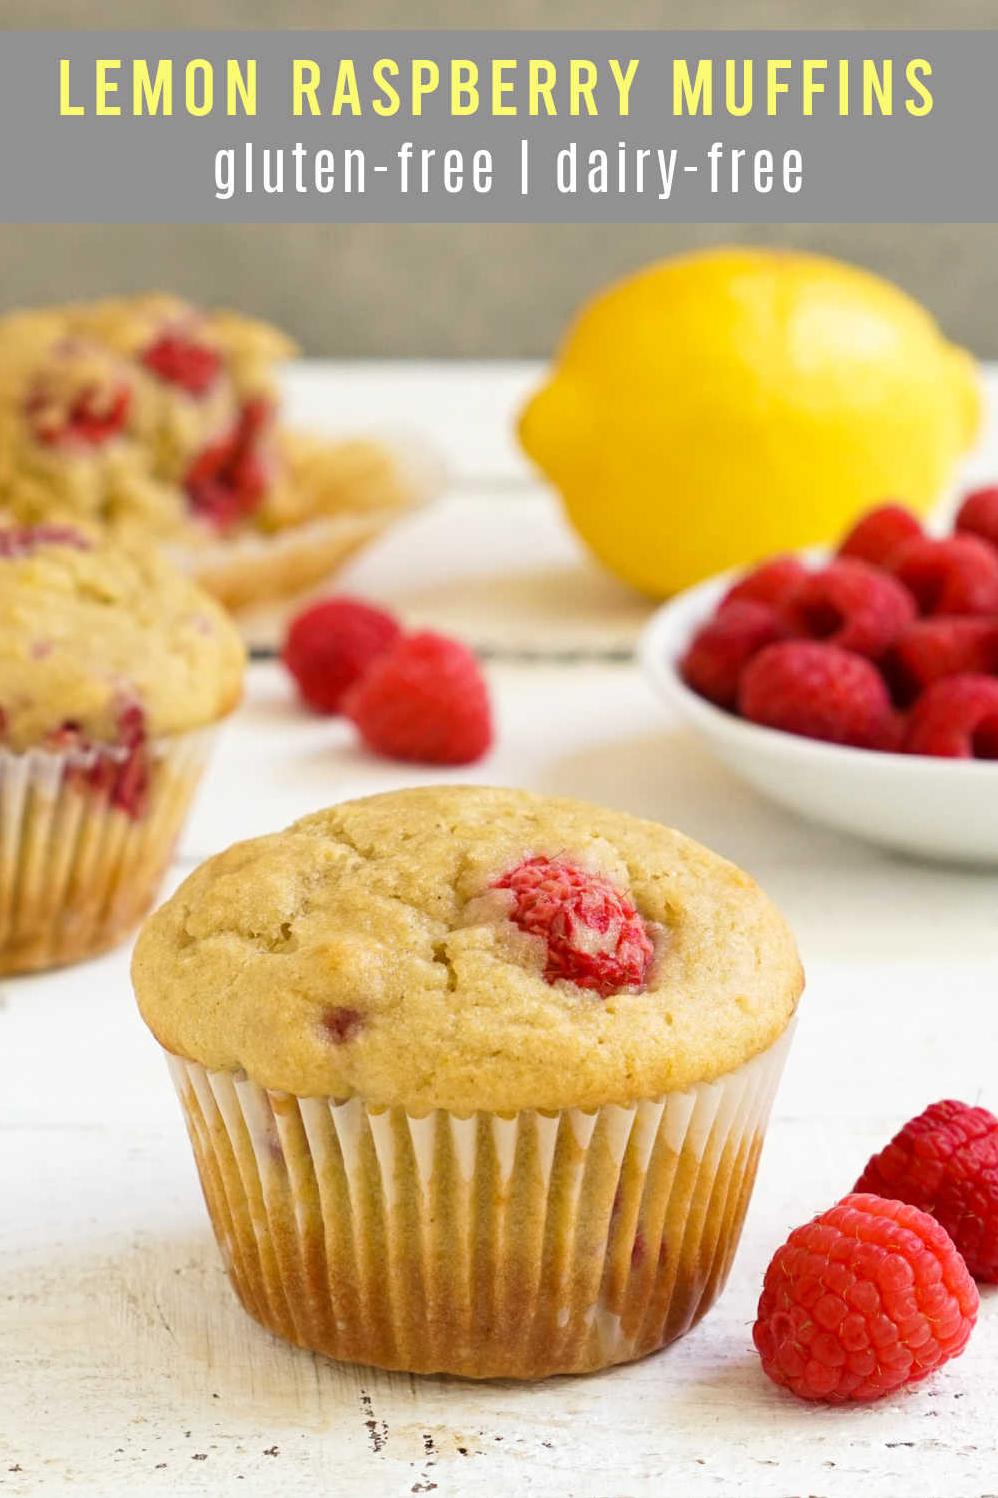  Packed with juicy raspberries that burst with every bite.